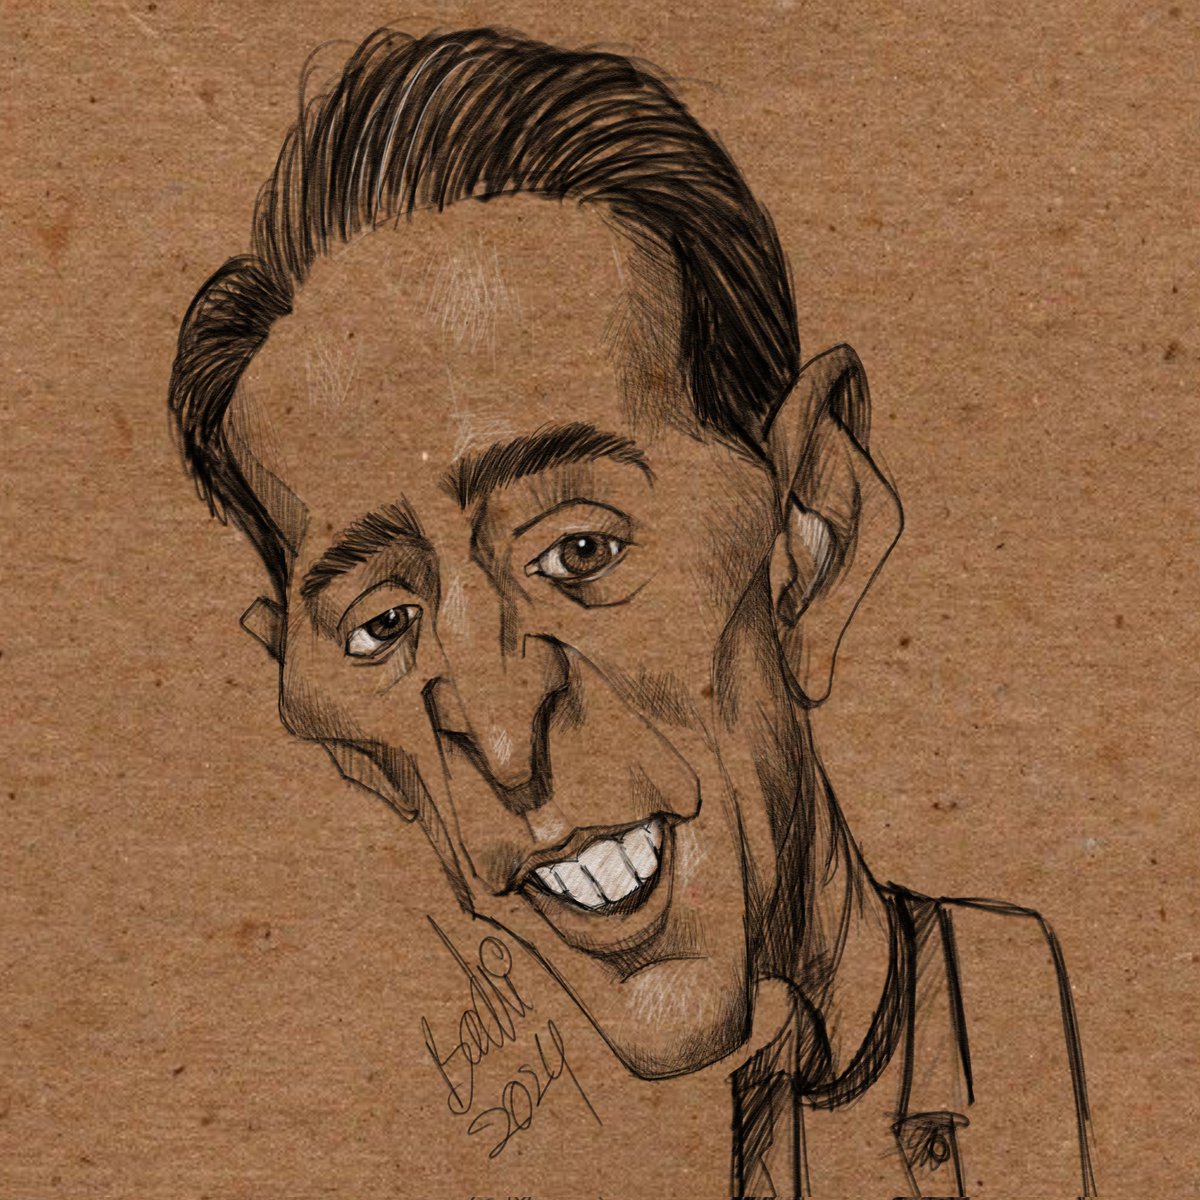 February -16th #NicholasCage #actor #caricaturesbybadri #Caricatura #caricature #caricatures #art #digitalart #drawing #openforcommission #commissionsopen #caricatureresolution